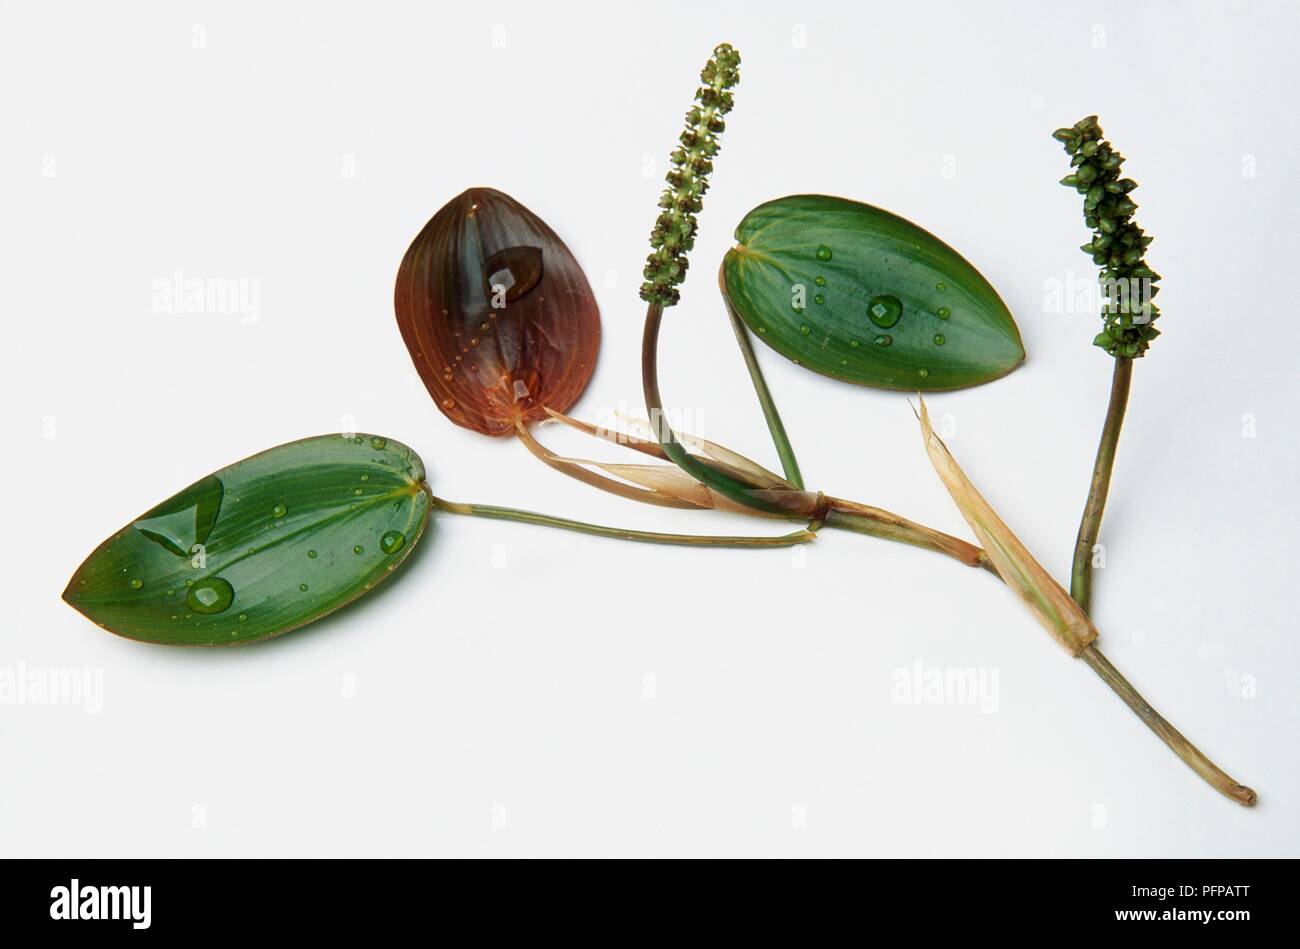 Potamogeton natans (Broad-leaved pondweed), leaves and flowers, close-up Stock Photo